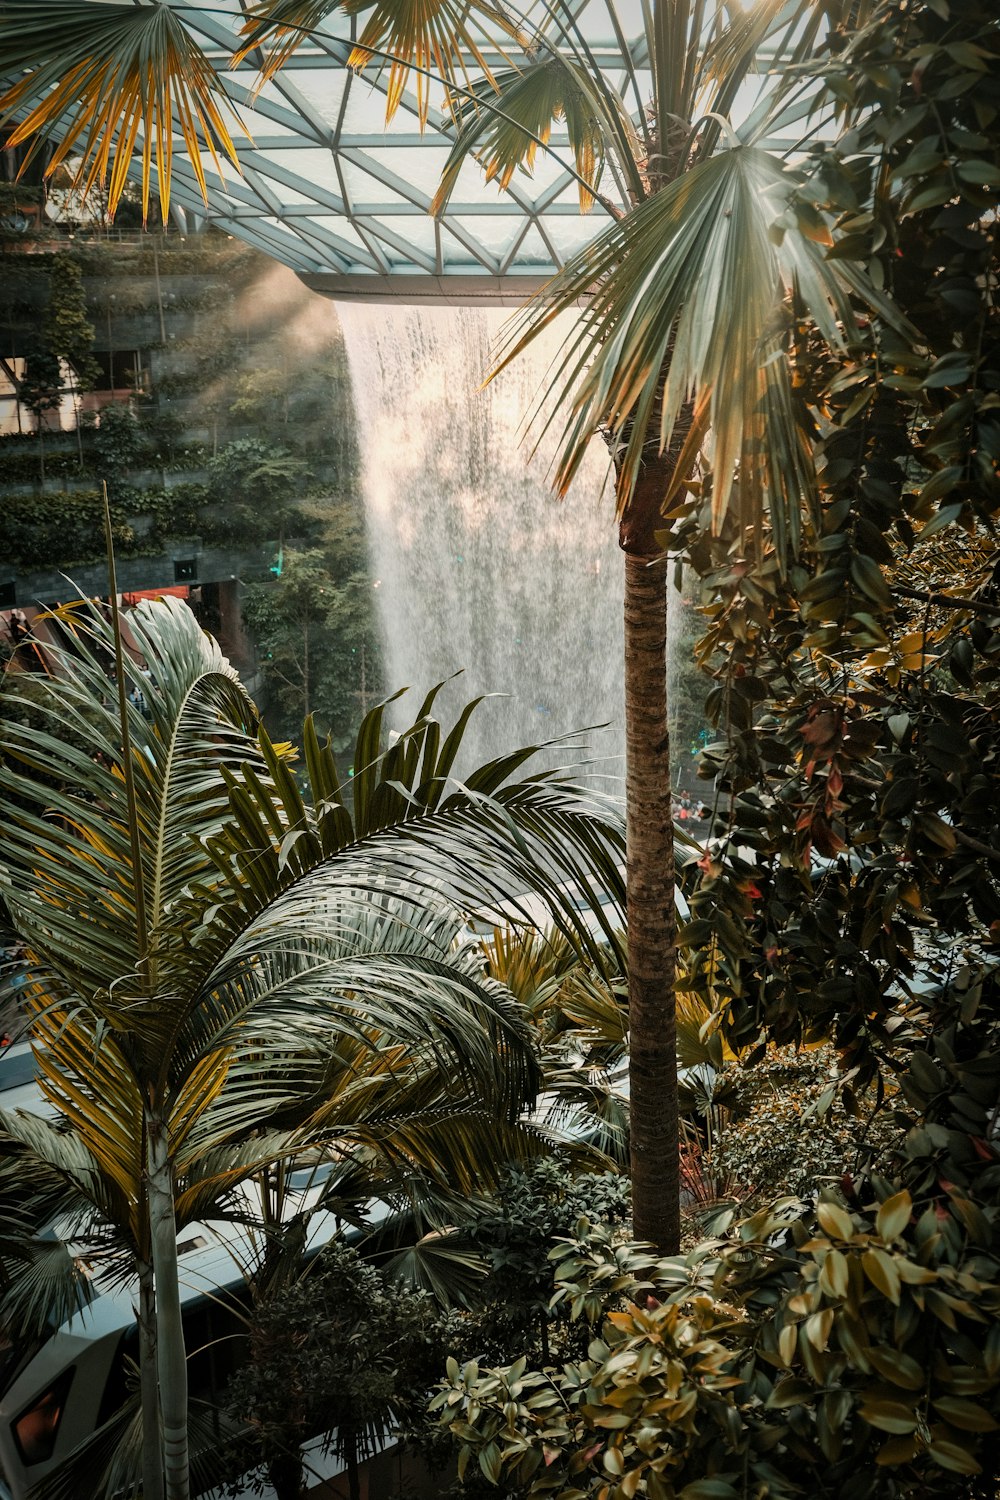 a view of a waterfall from inside a building